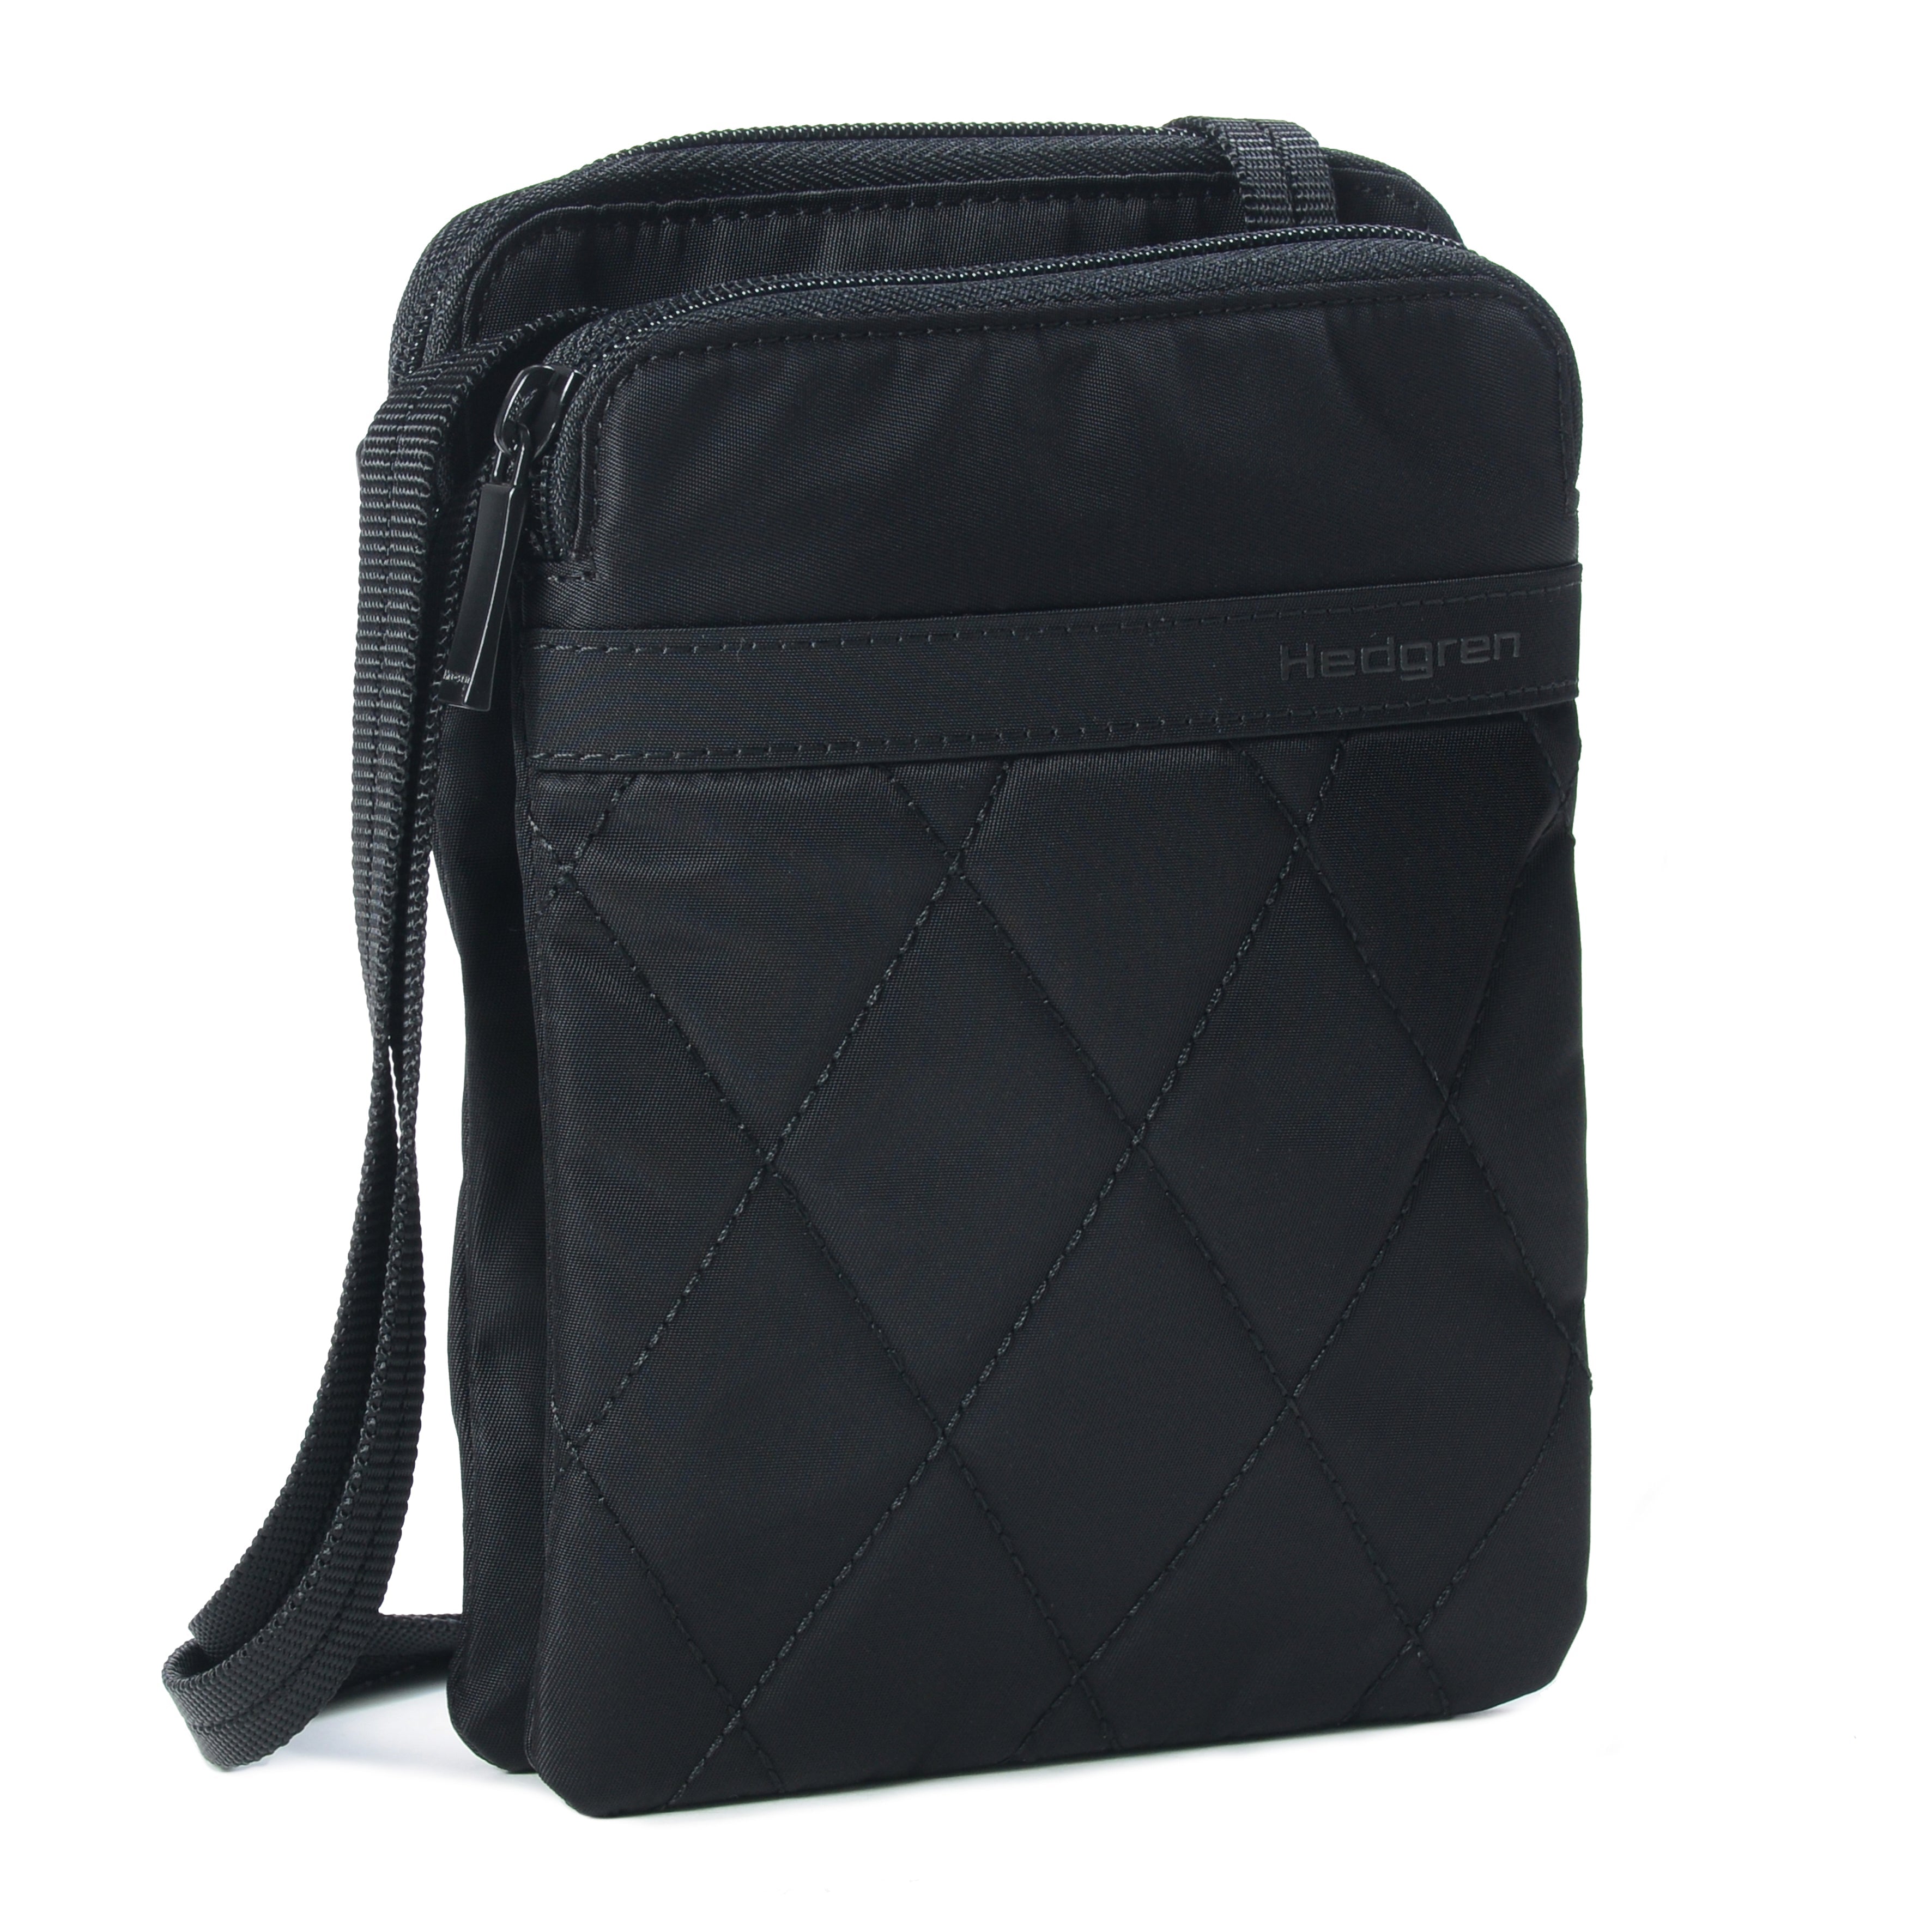 Hedgren Rupee Cell Phone Bag with RFID Pocket Quilted Black